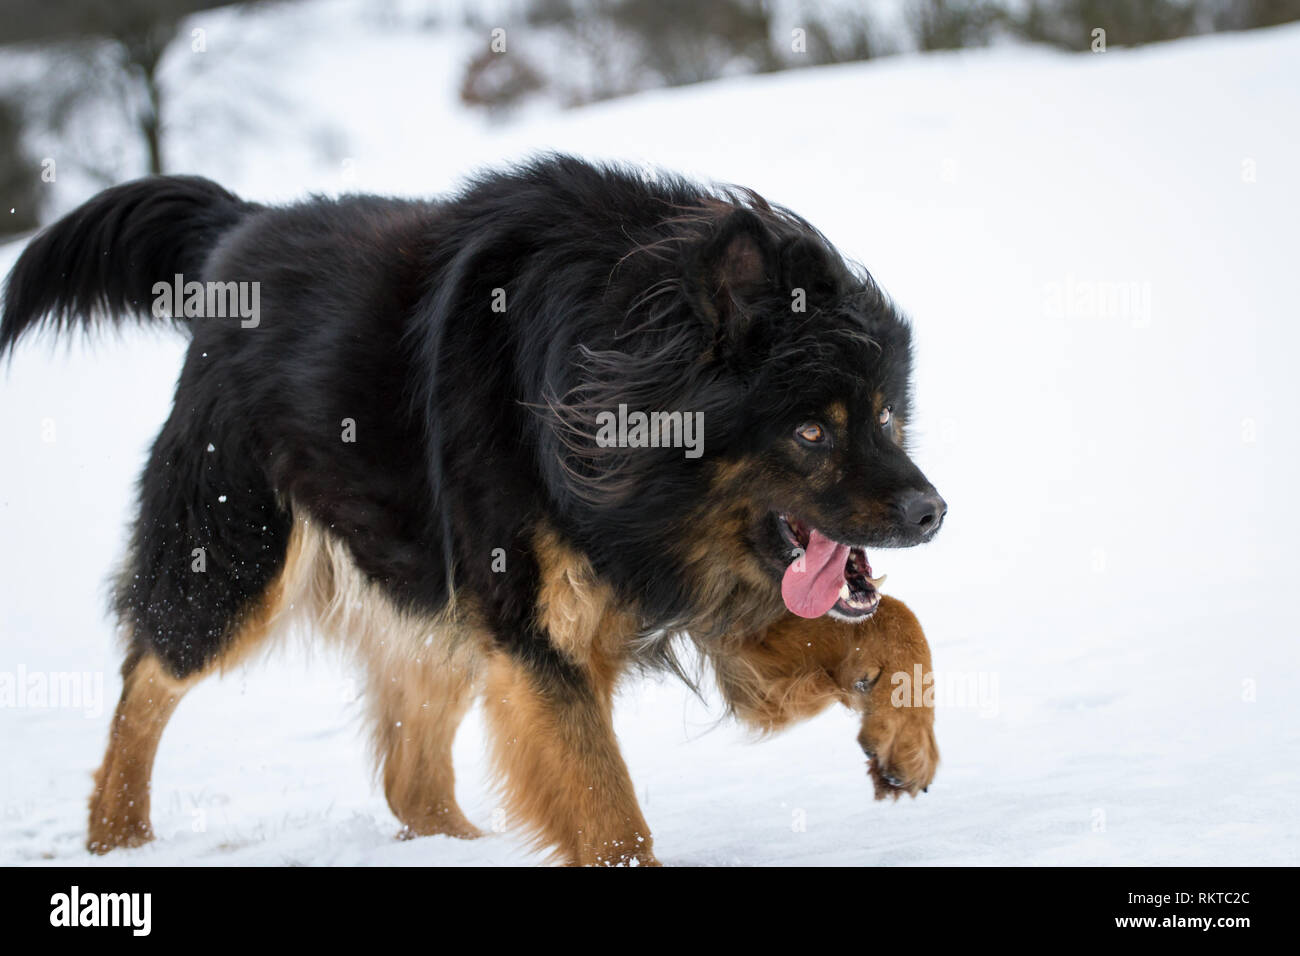 German Shepherd In Snow High Resolution Stock Photography and Images